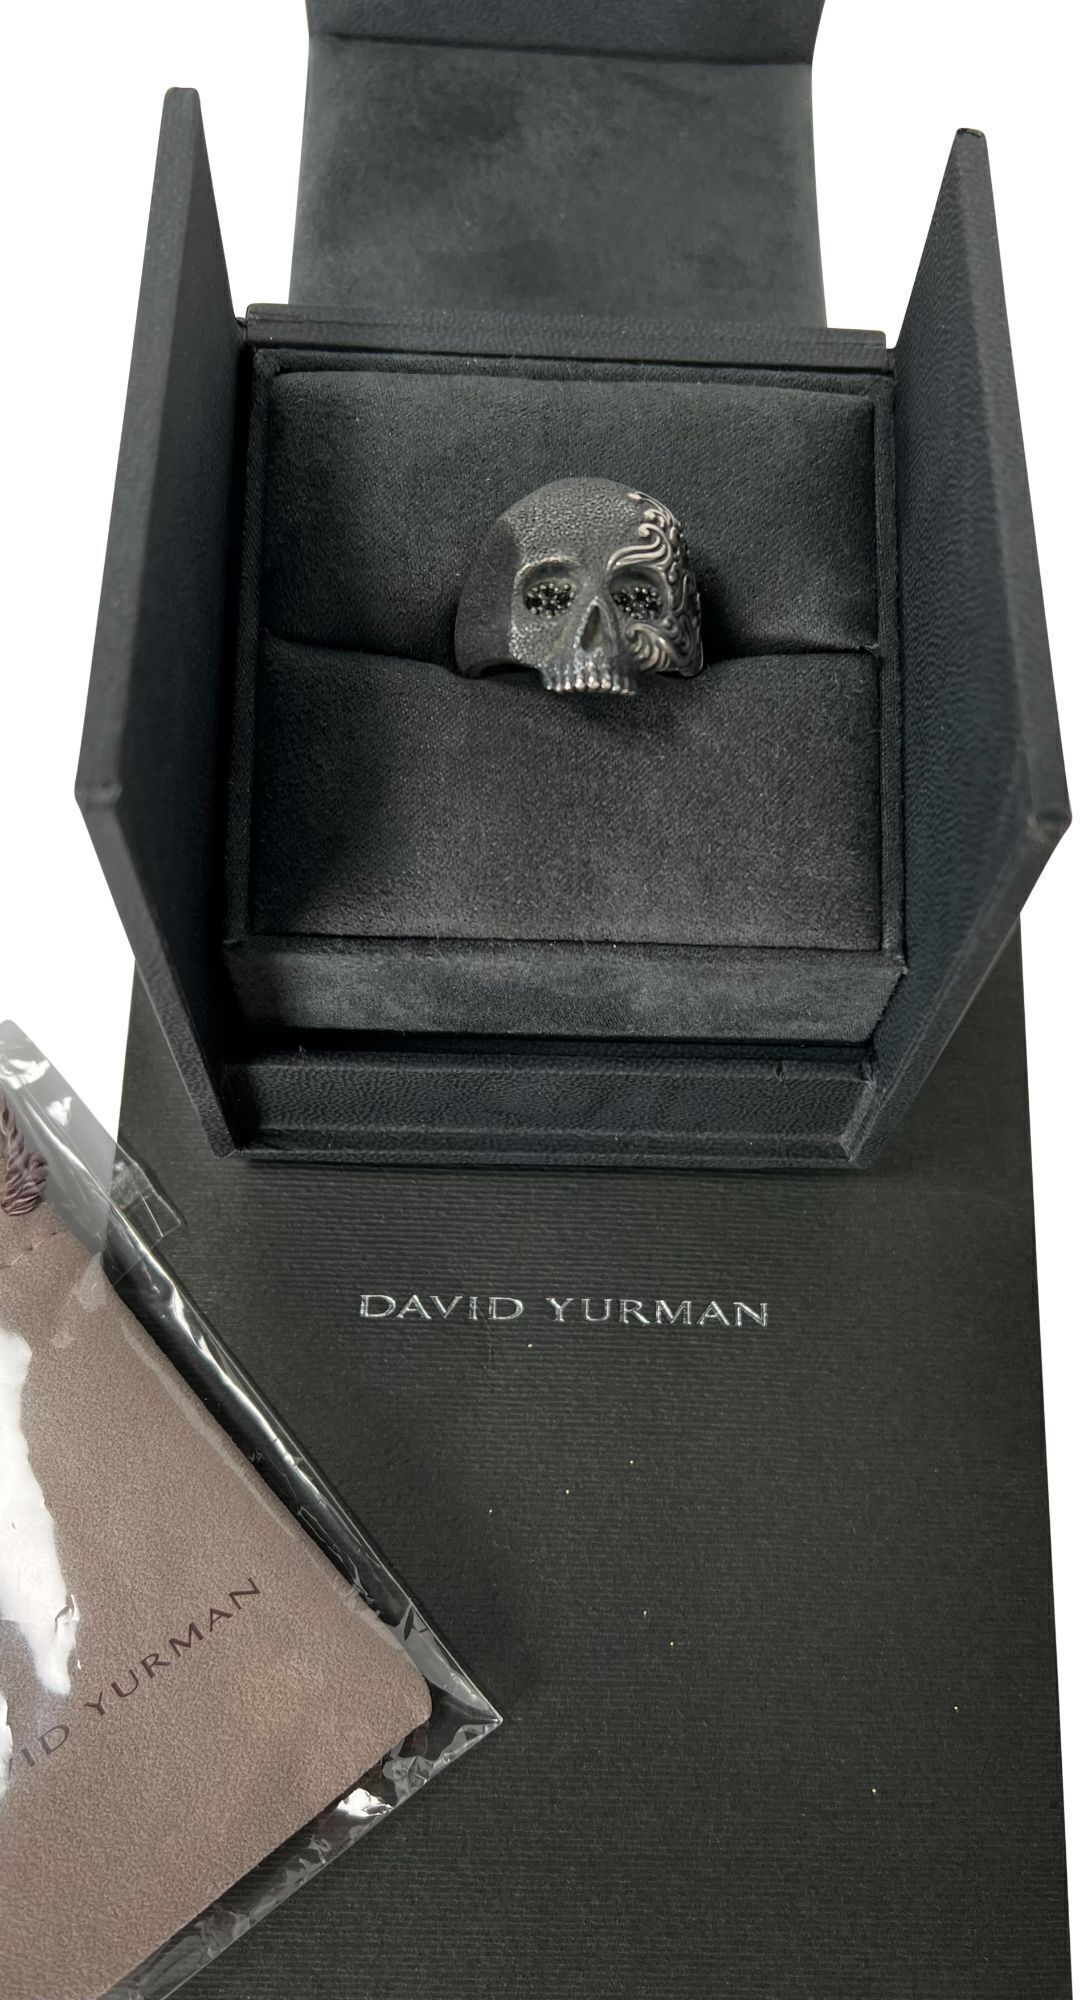 David Yurman Waves Skull Ring with Pave Black Diamonds in Sterling Silver